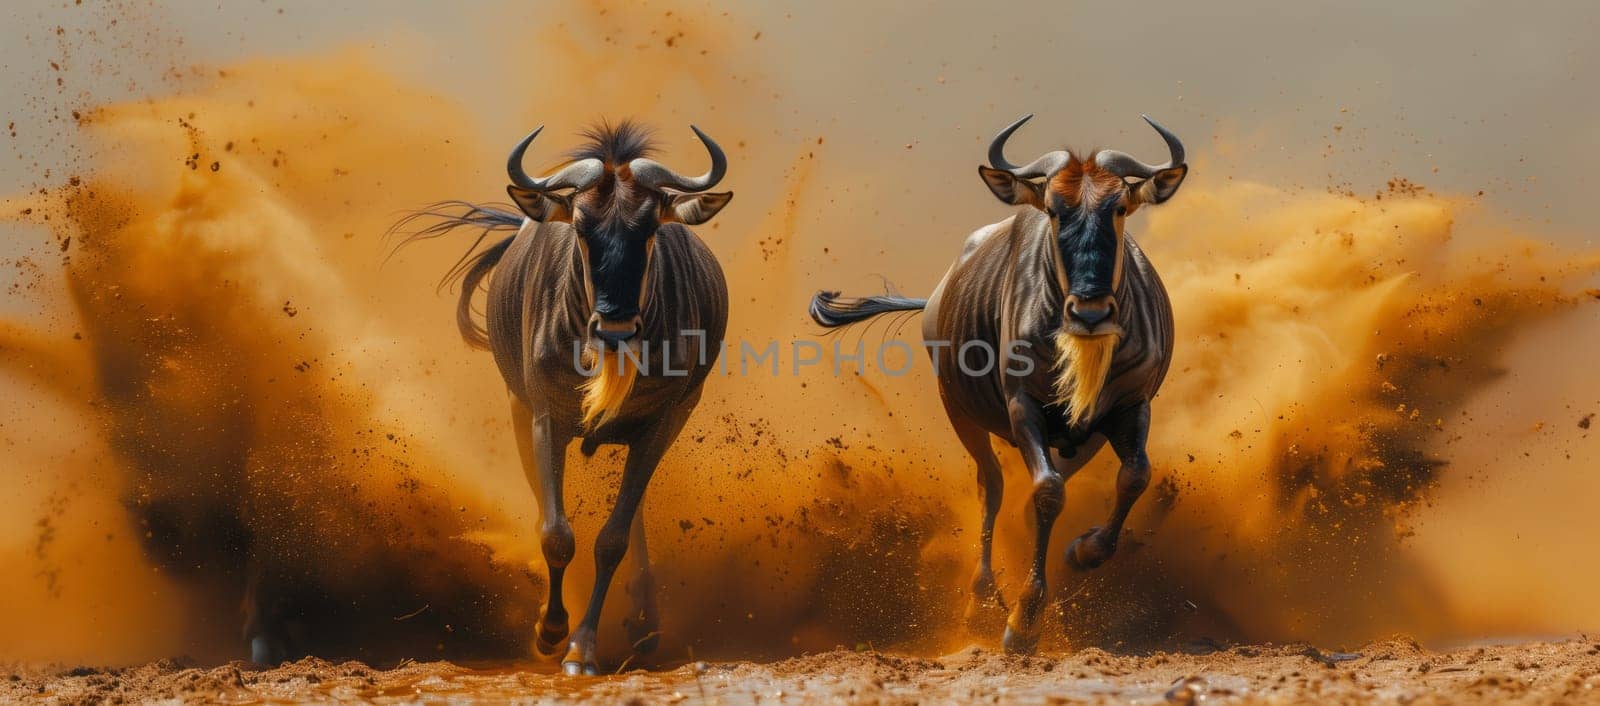 Two wildebeest, working animals, are galloping across a grassland in a natural landscape. Their movement could inspire a beautiful painting capturing the event